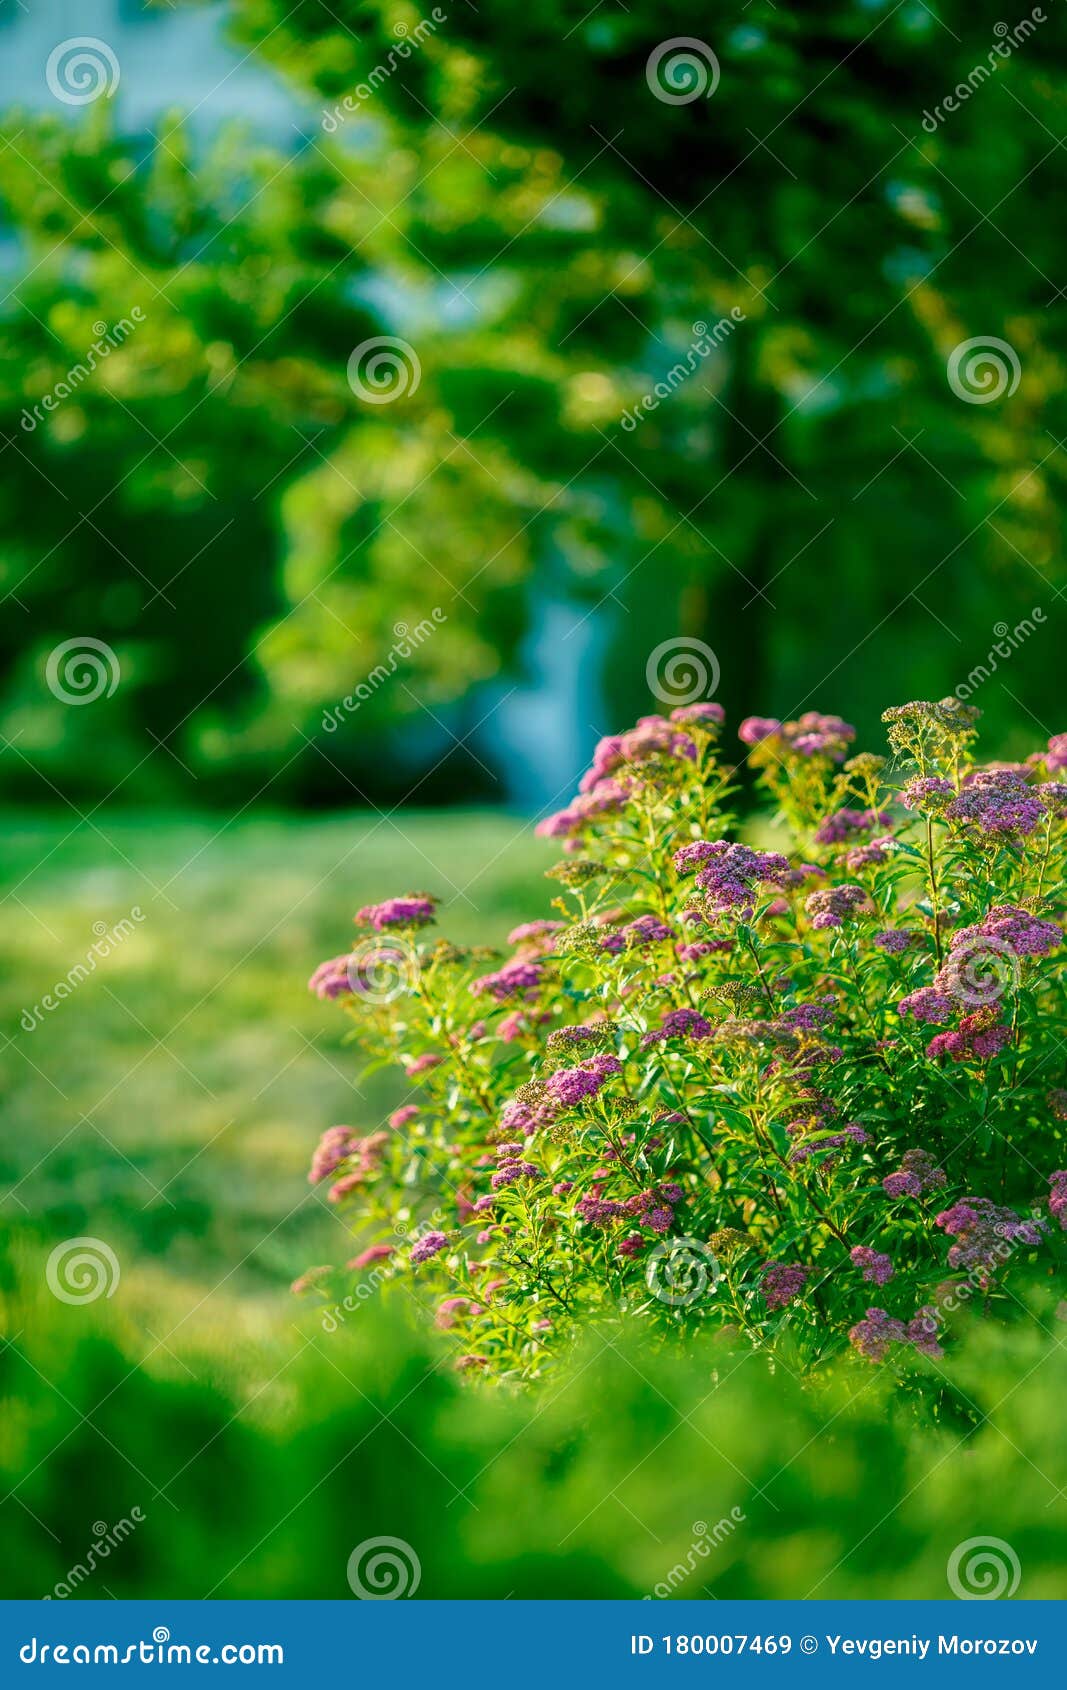 Nature Background Photos Download Free Nature Background Stock Photos  HD  Images